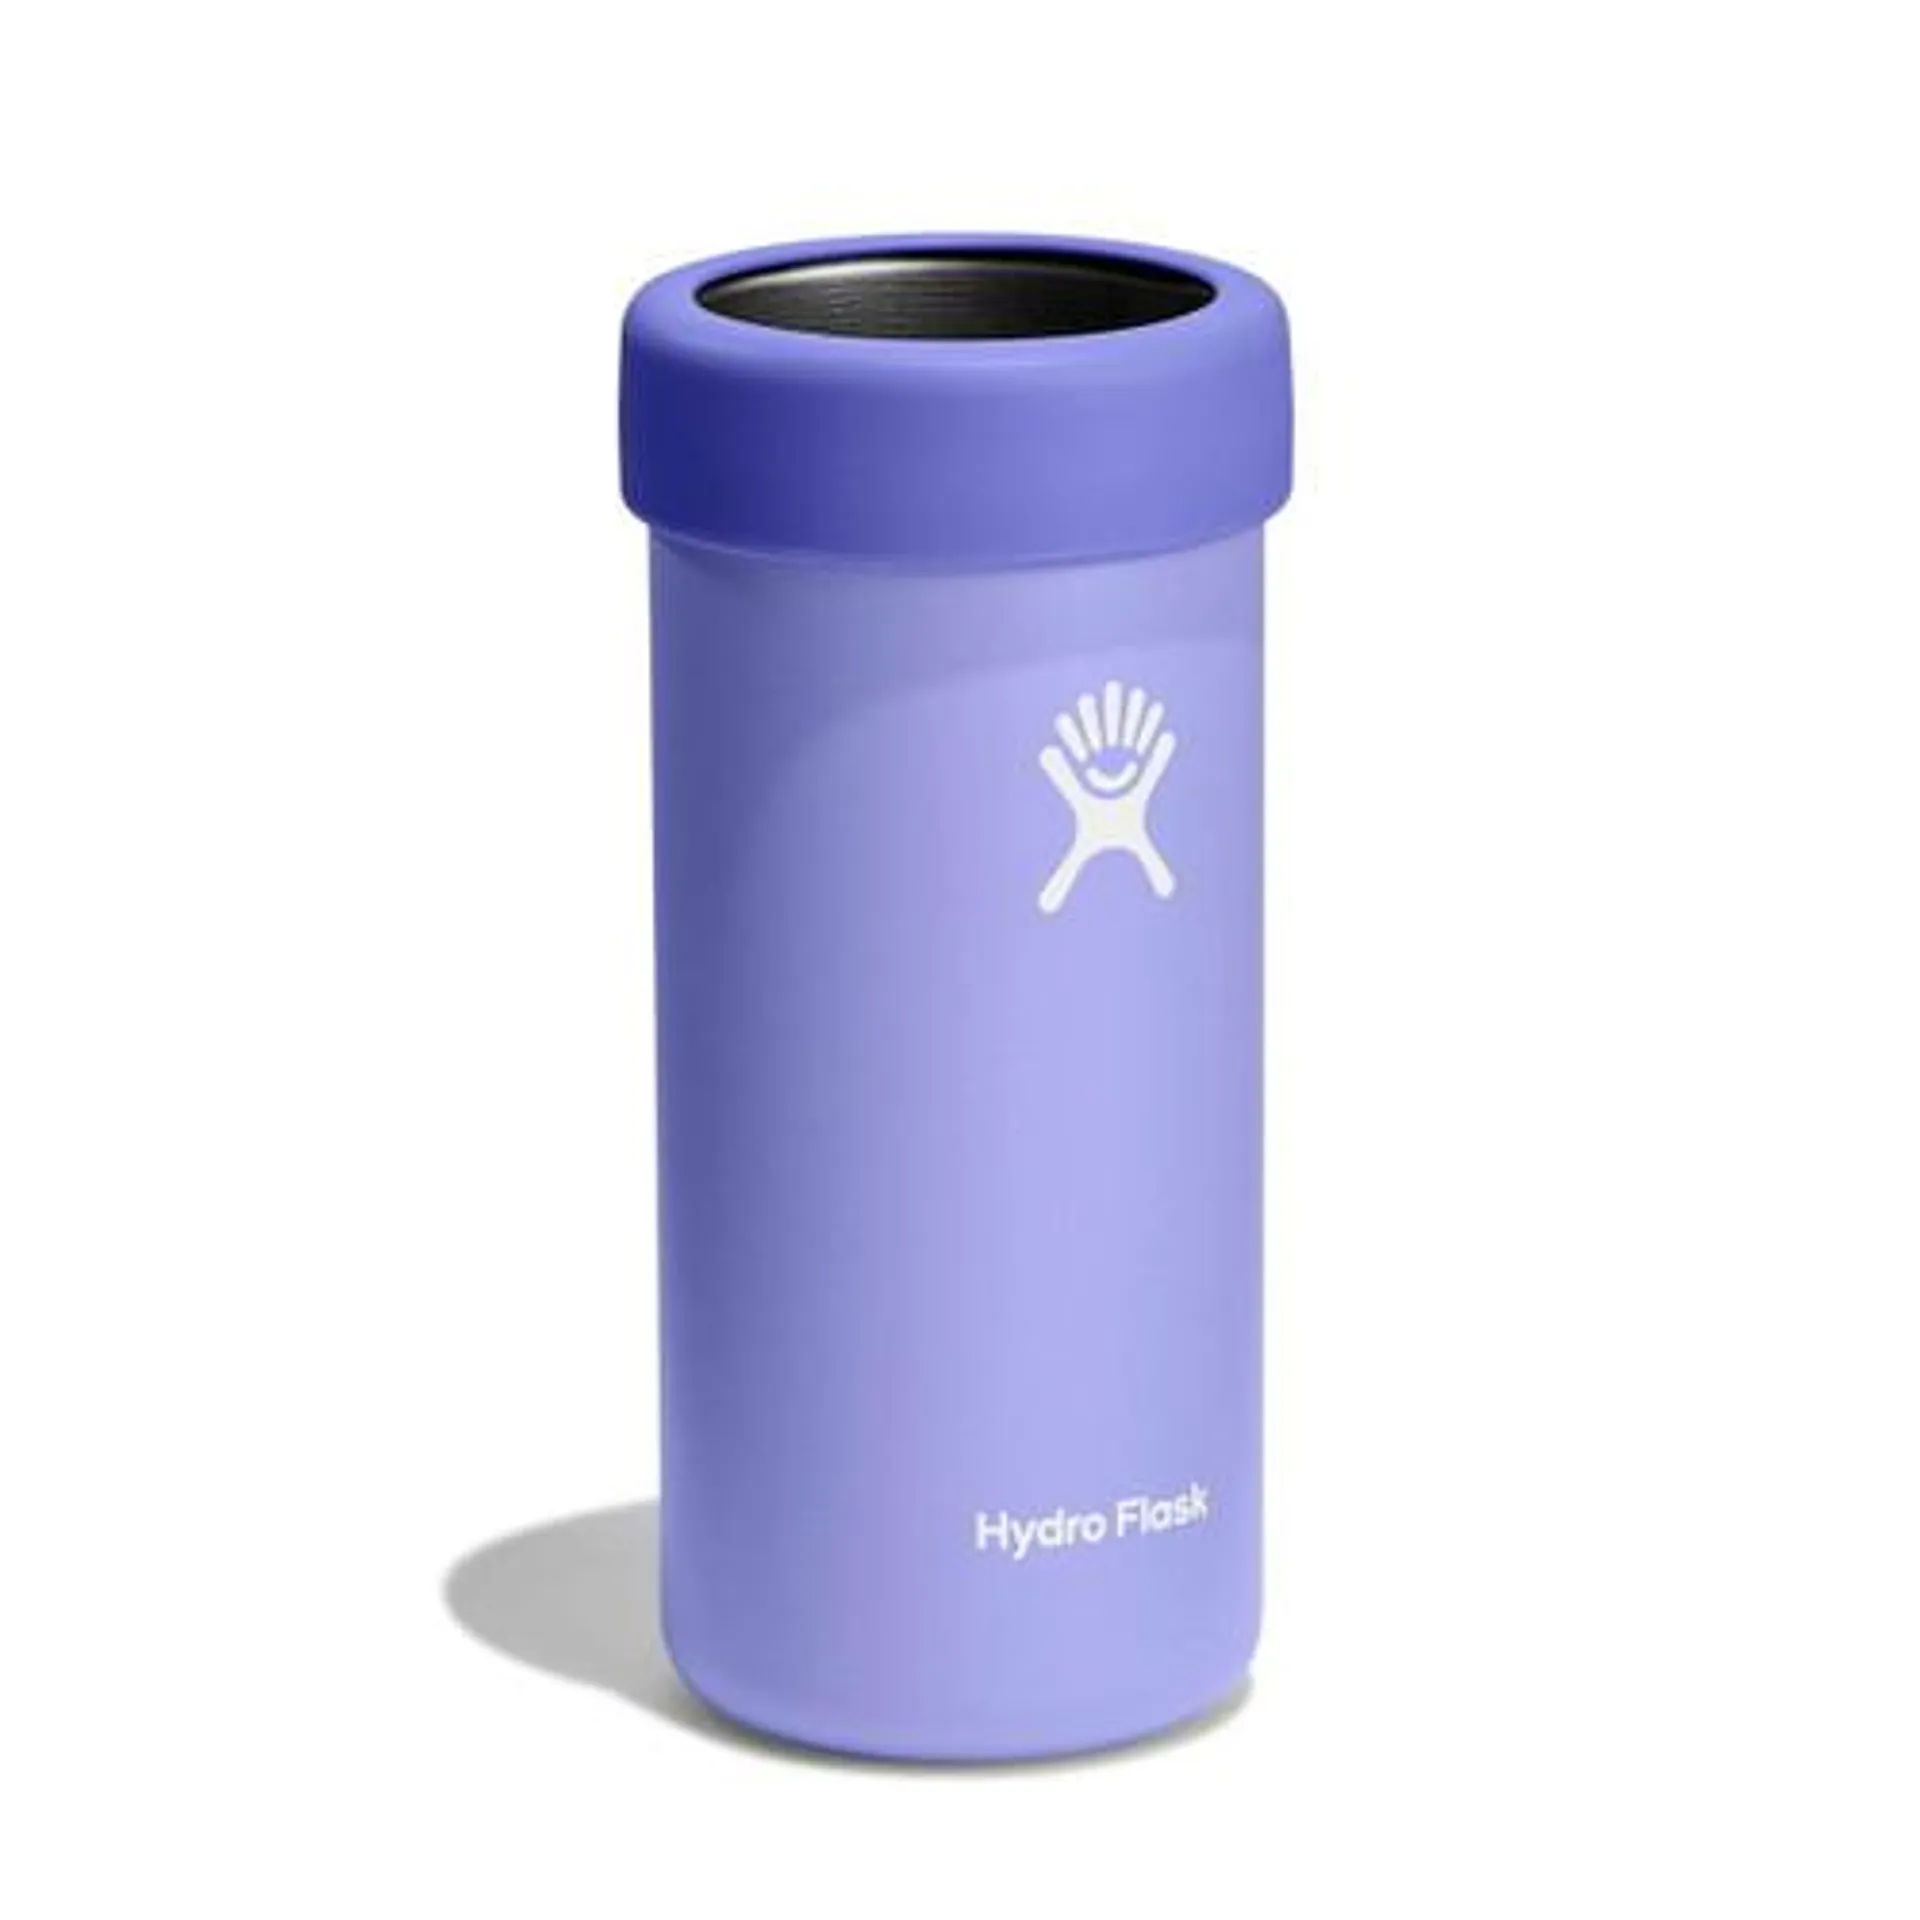 Hydro Flask 12oz Slim Coolers Cup